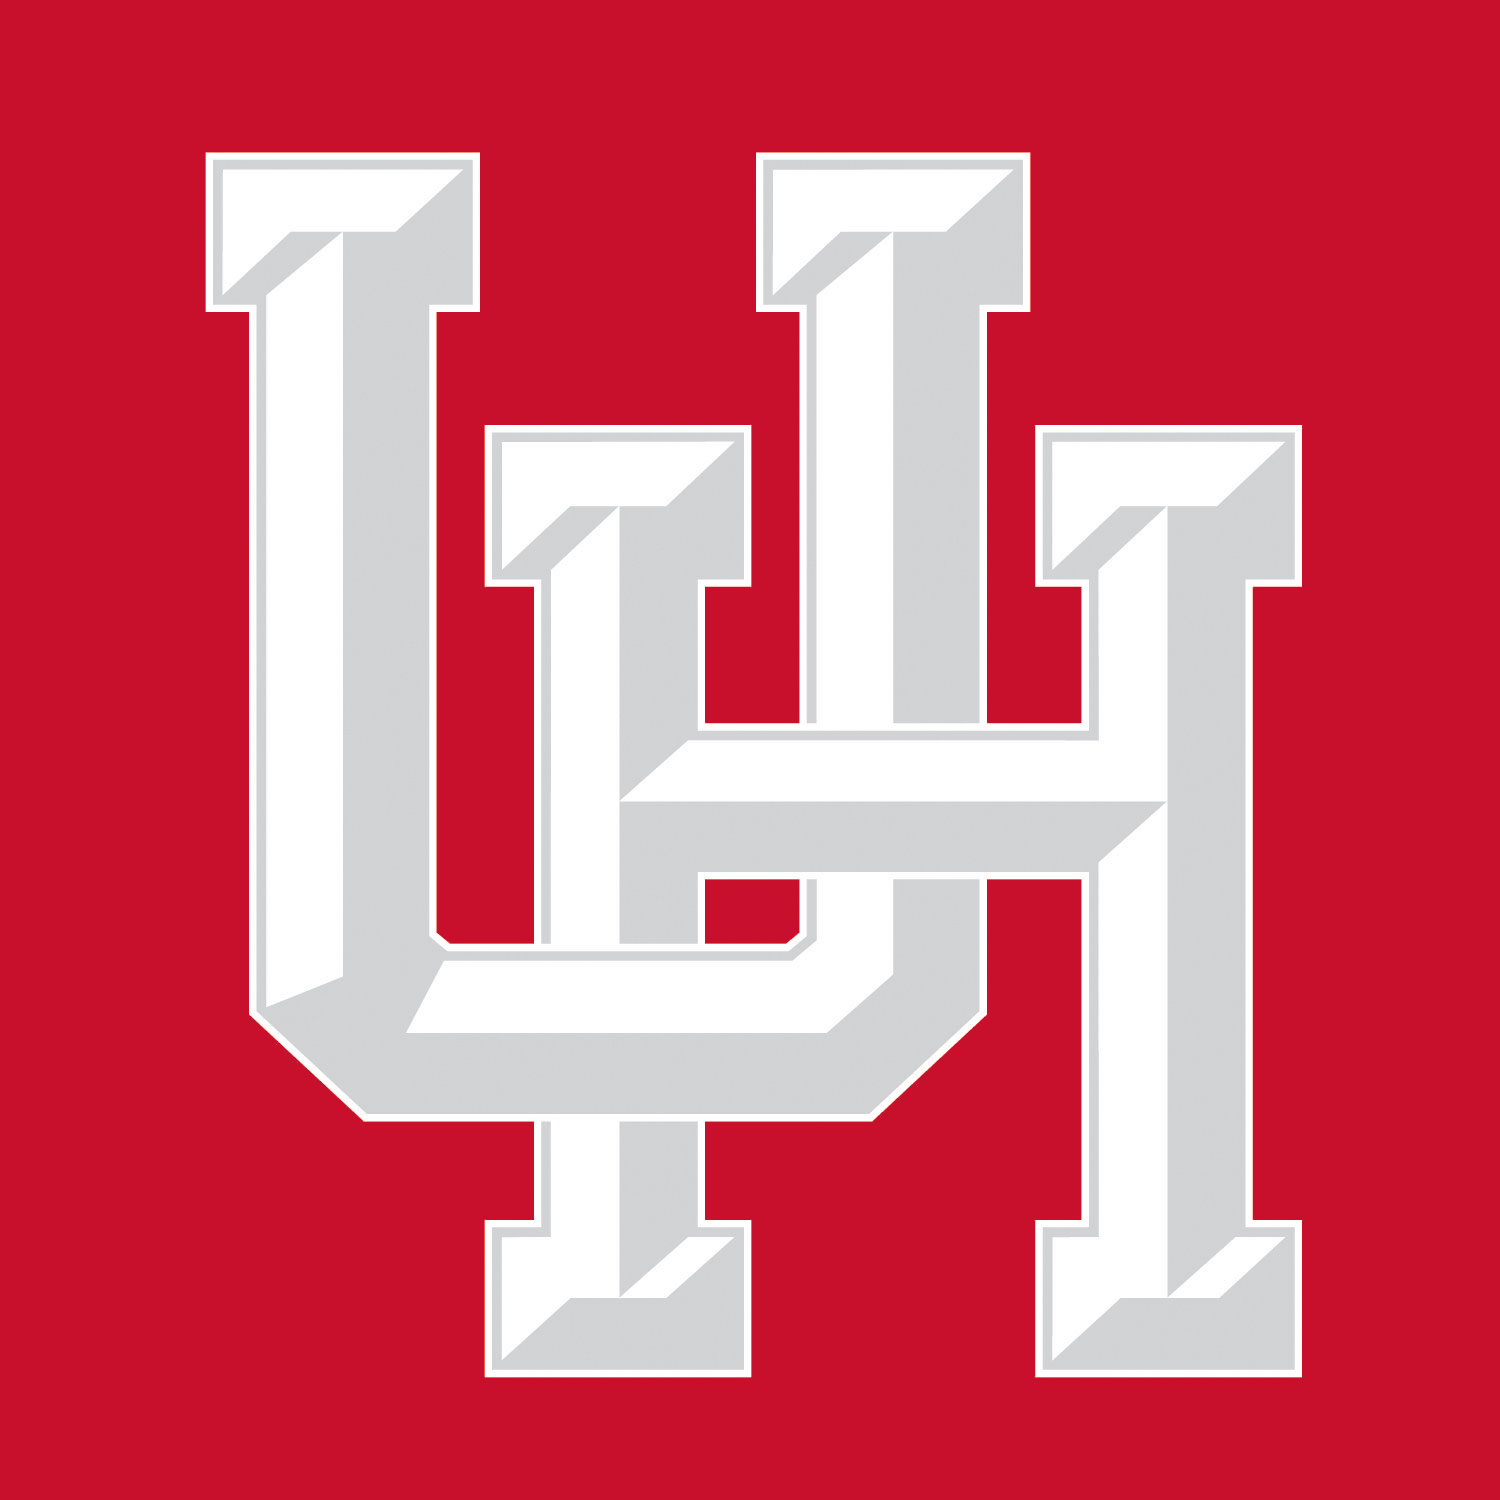 Red H Football Logo - File:Logo of the University of Houston.png - Wikimedia Commons